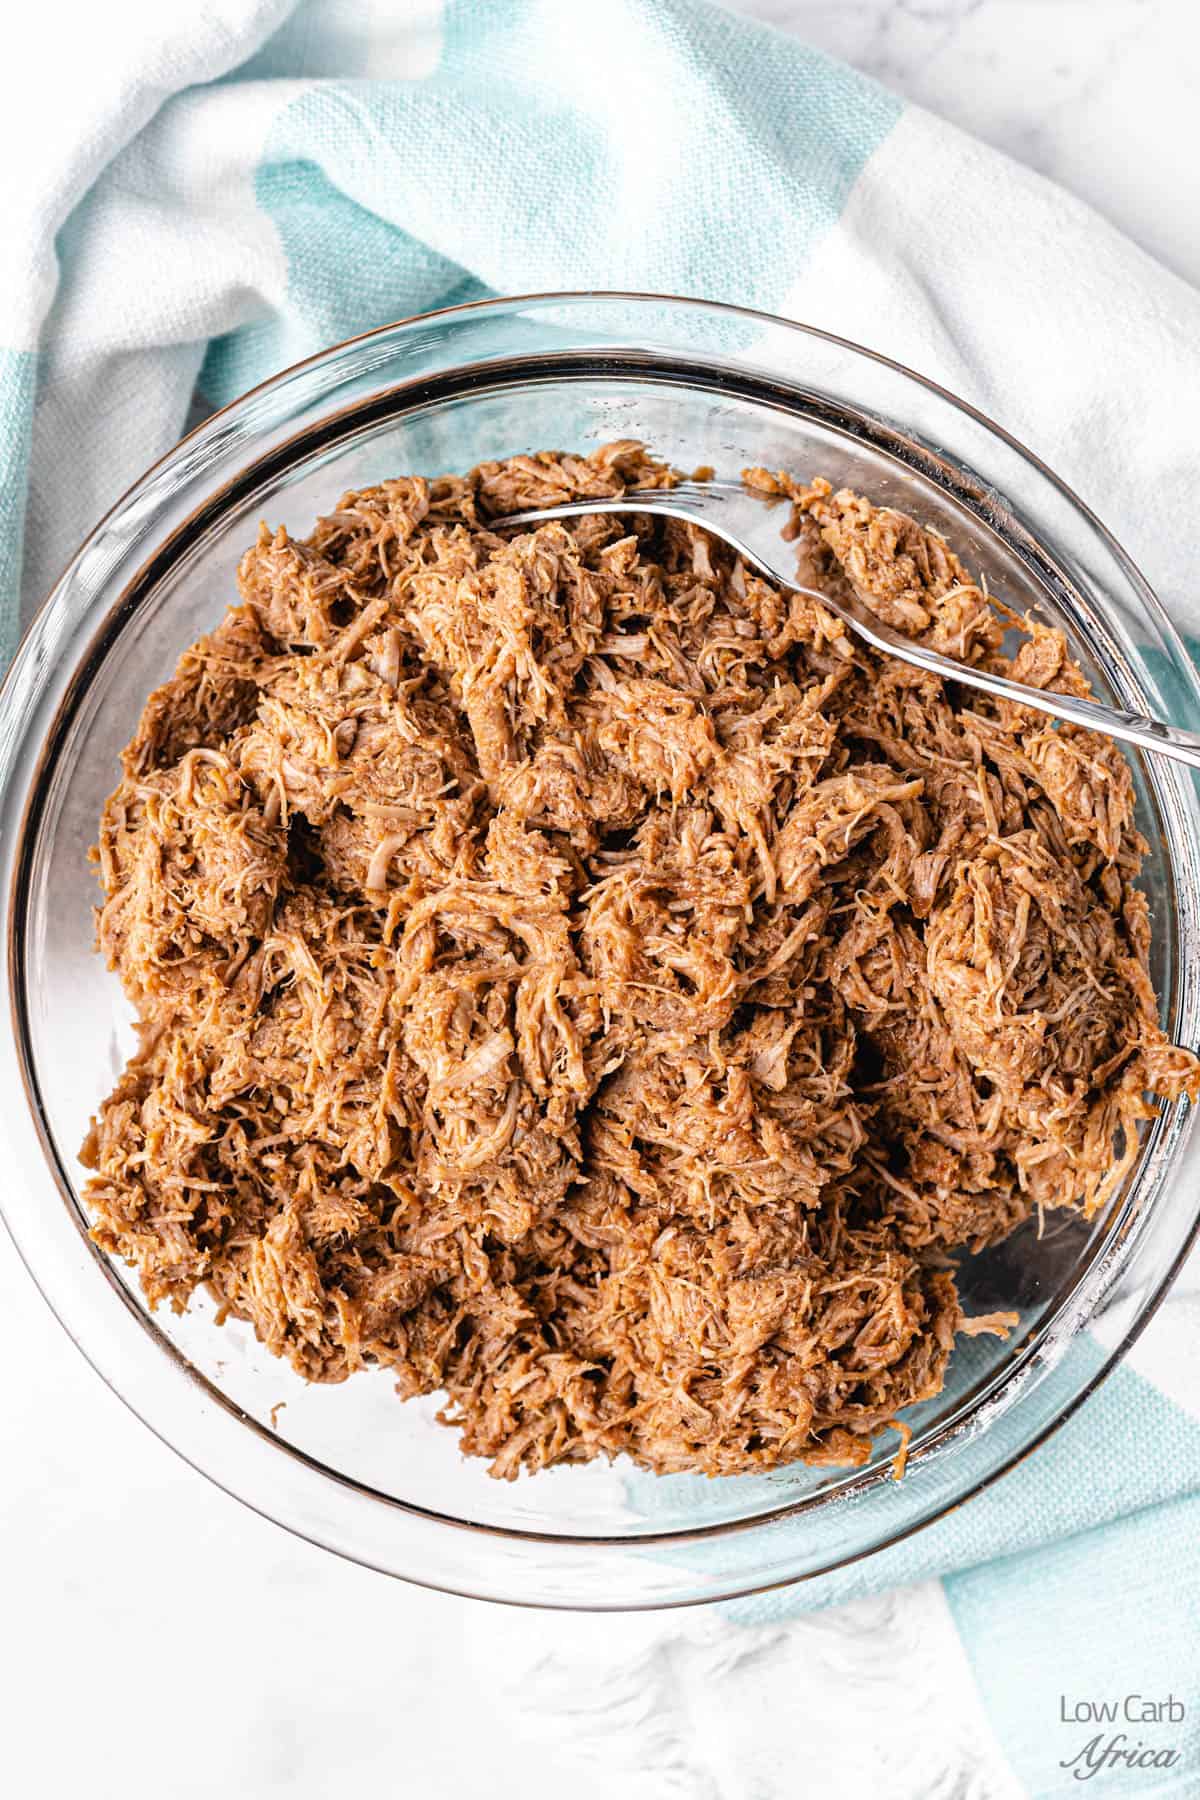 Ready-to-eat Instant Pot Pulled Pork.